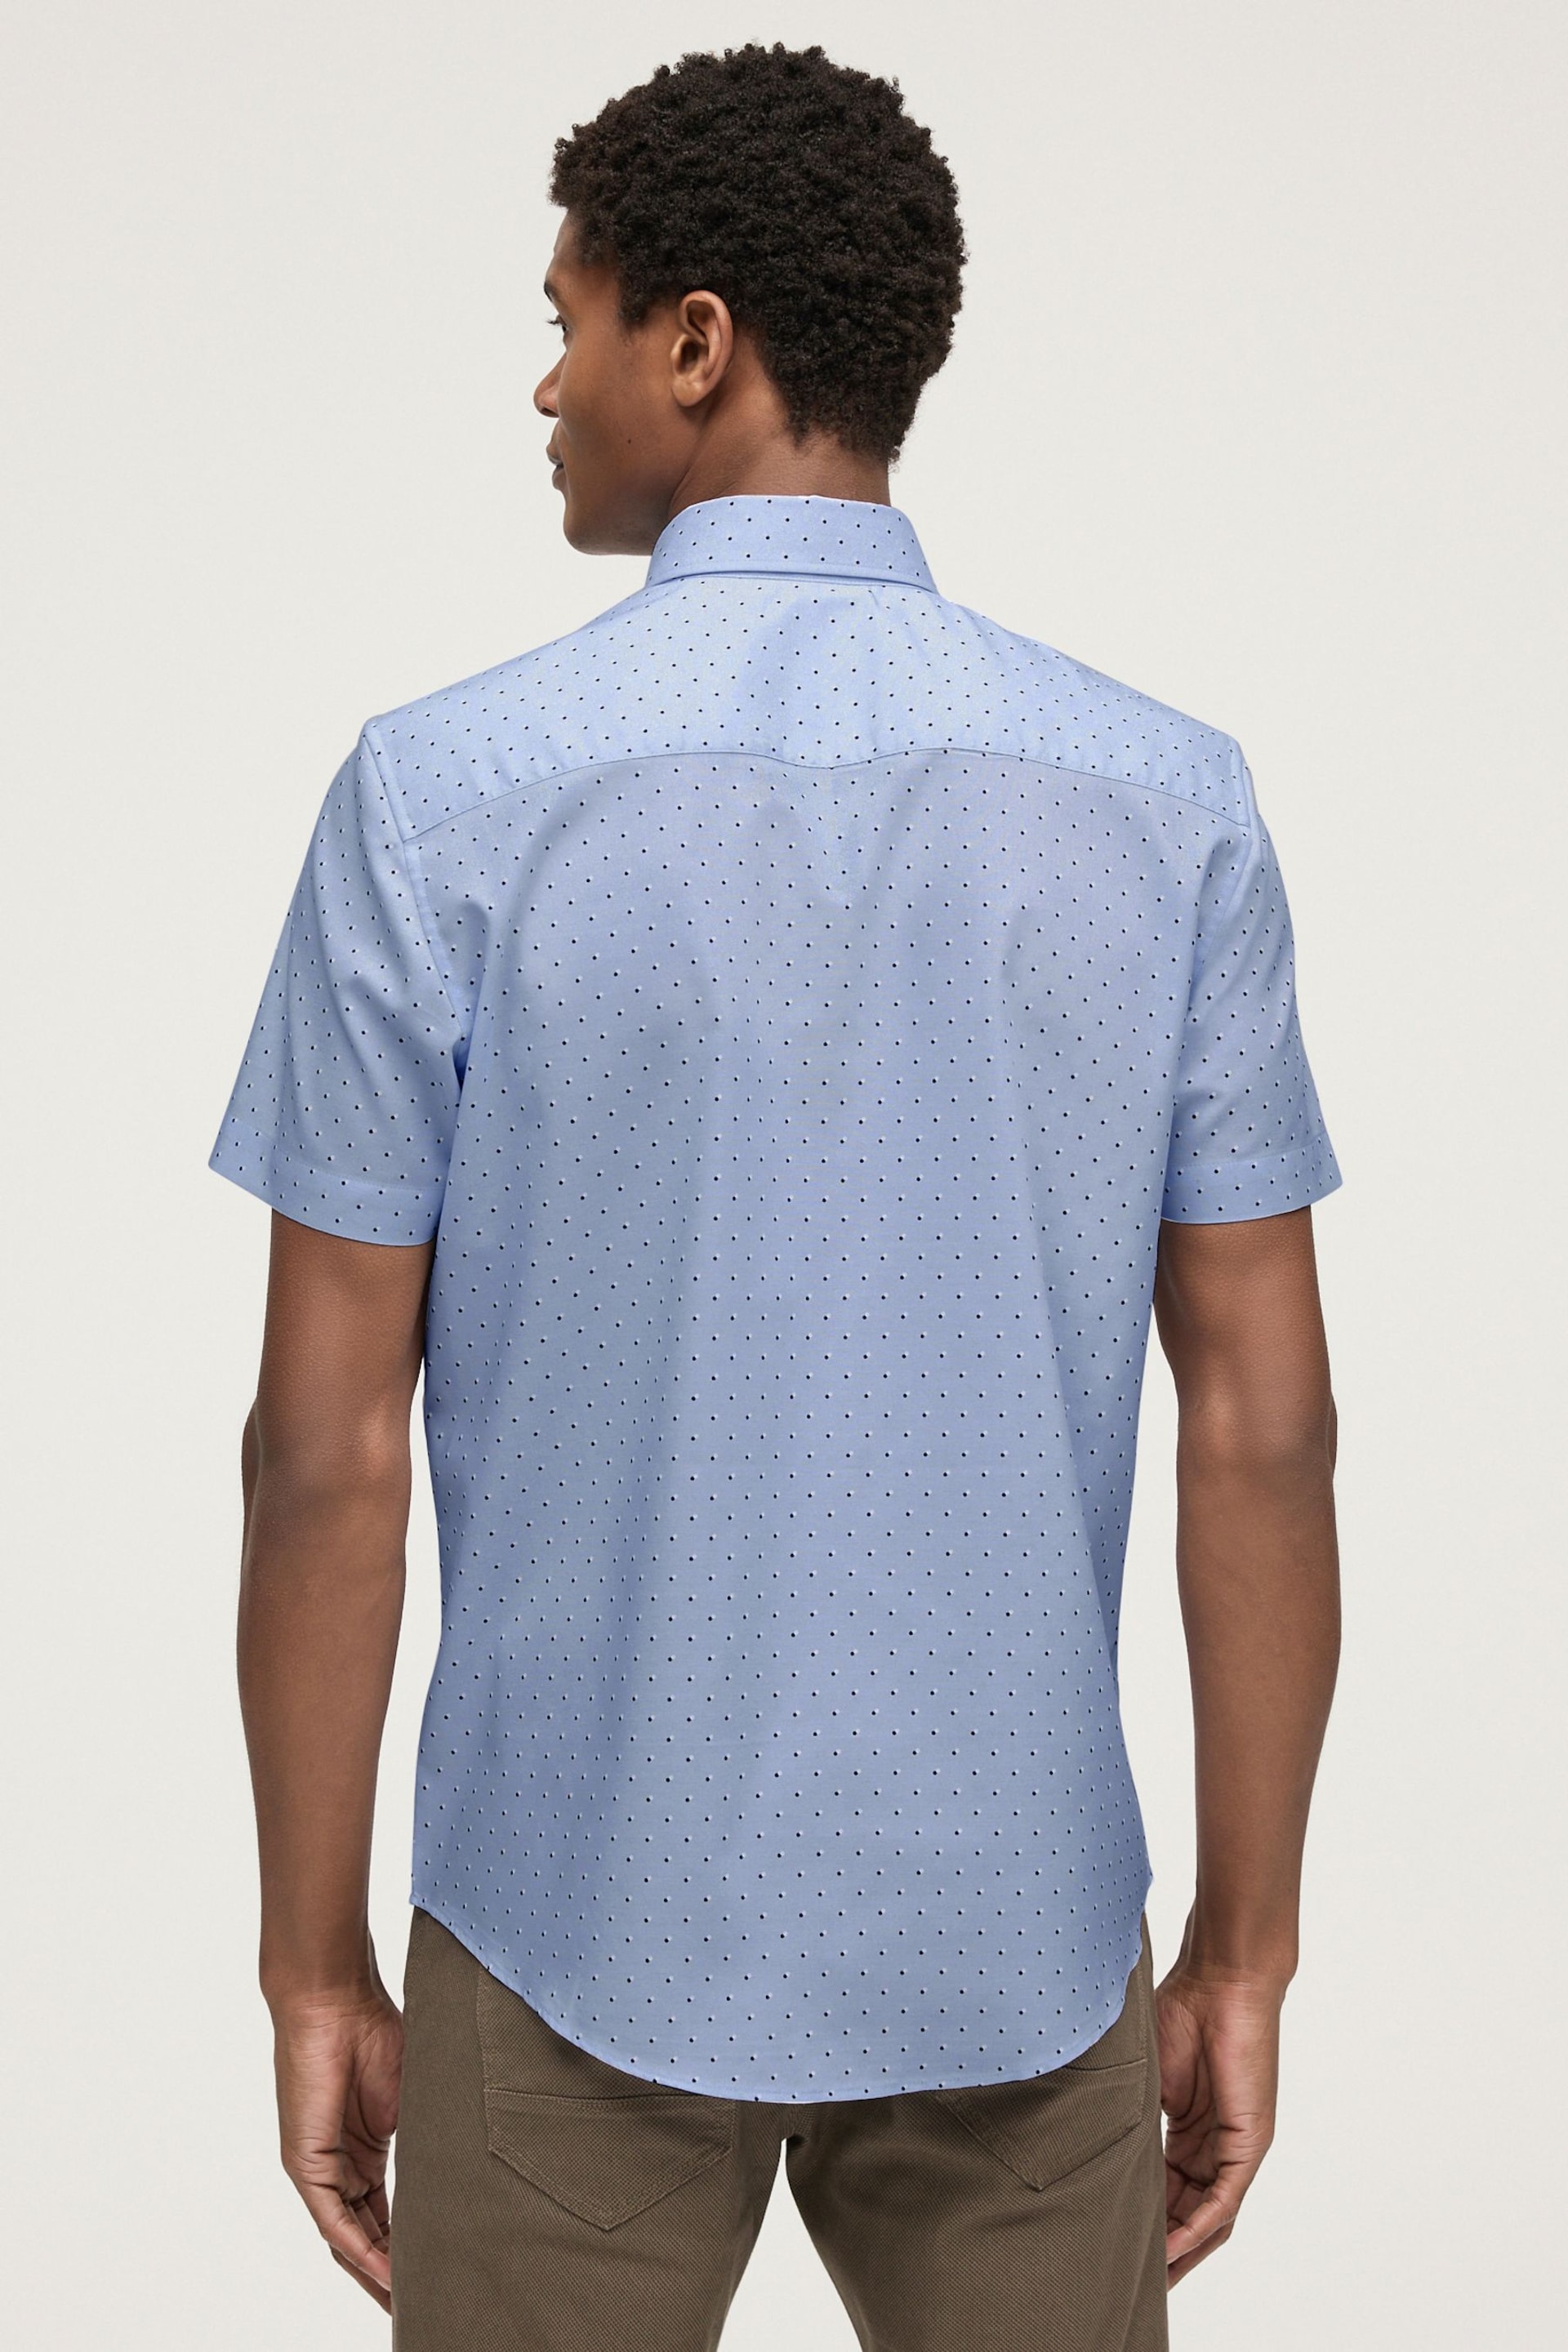 Light Blue Easy Iron Button Down Short Sleeve Oxford Shirt - Image 3 of 8